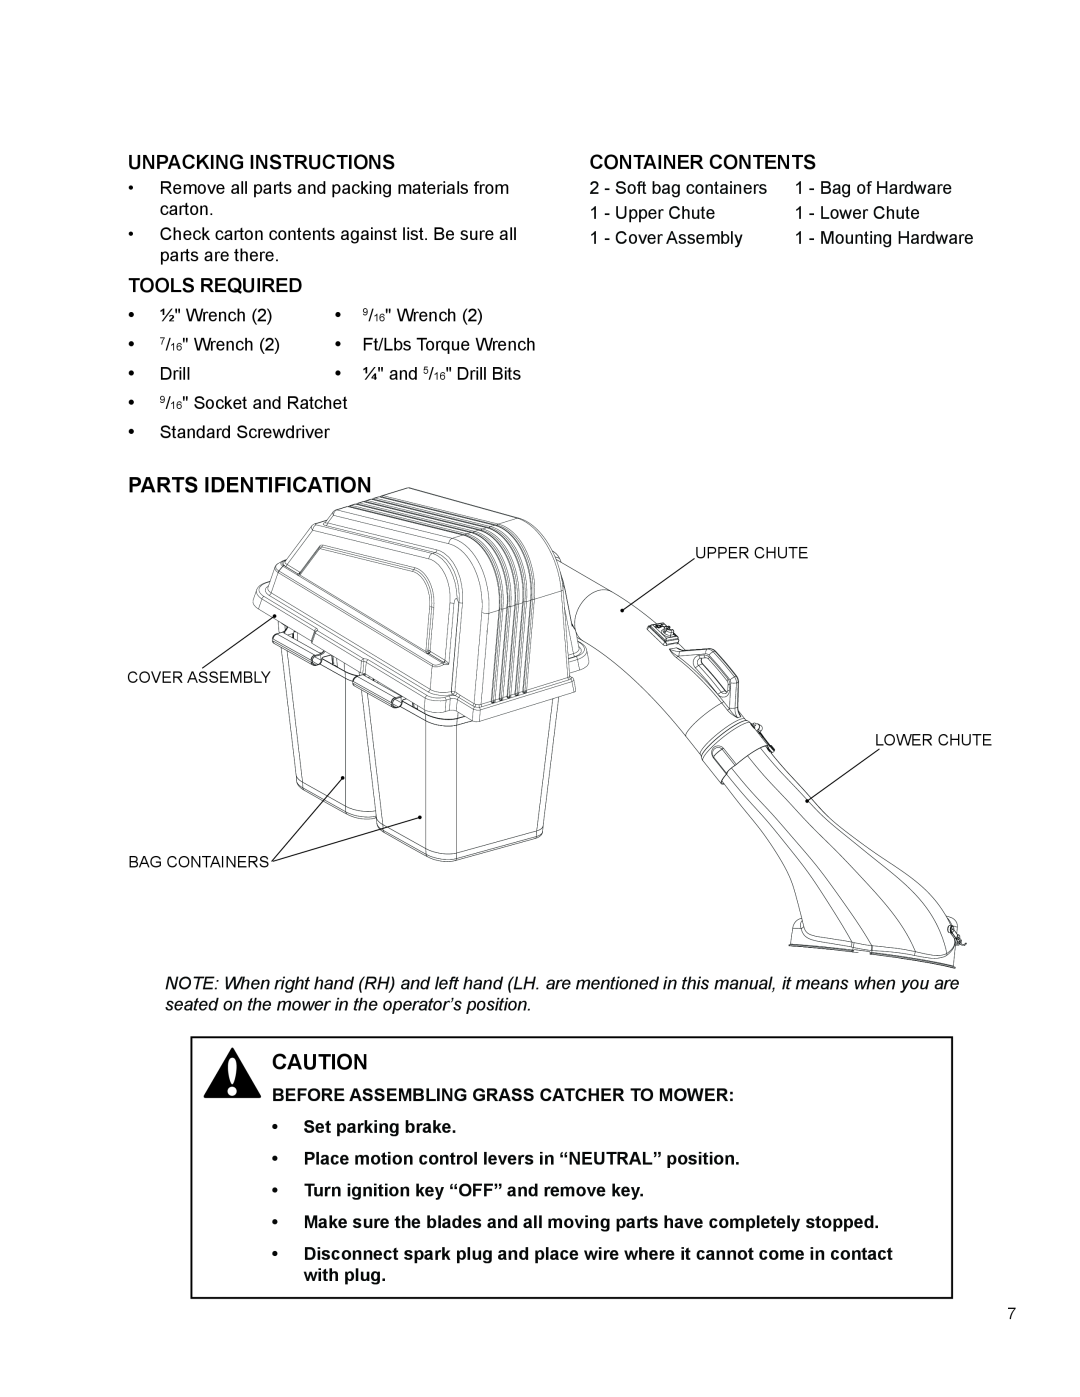 Dixon 966004101 manual Parts Identification, Unpacking Instructions, Container Contents, Tools Required 